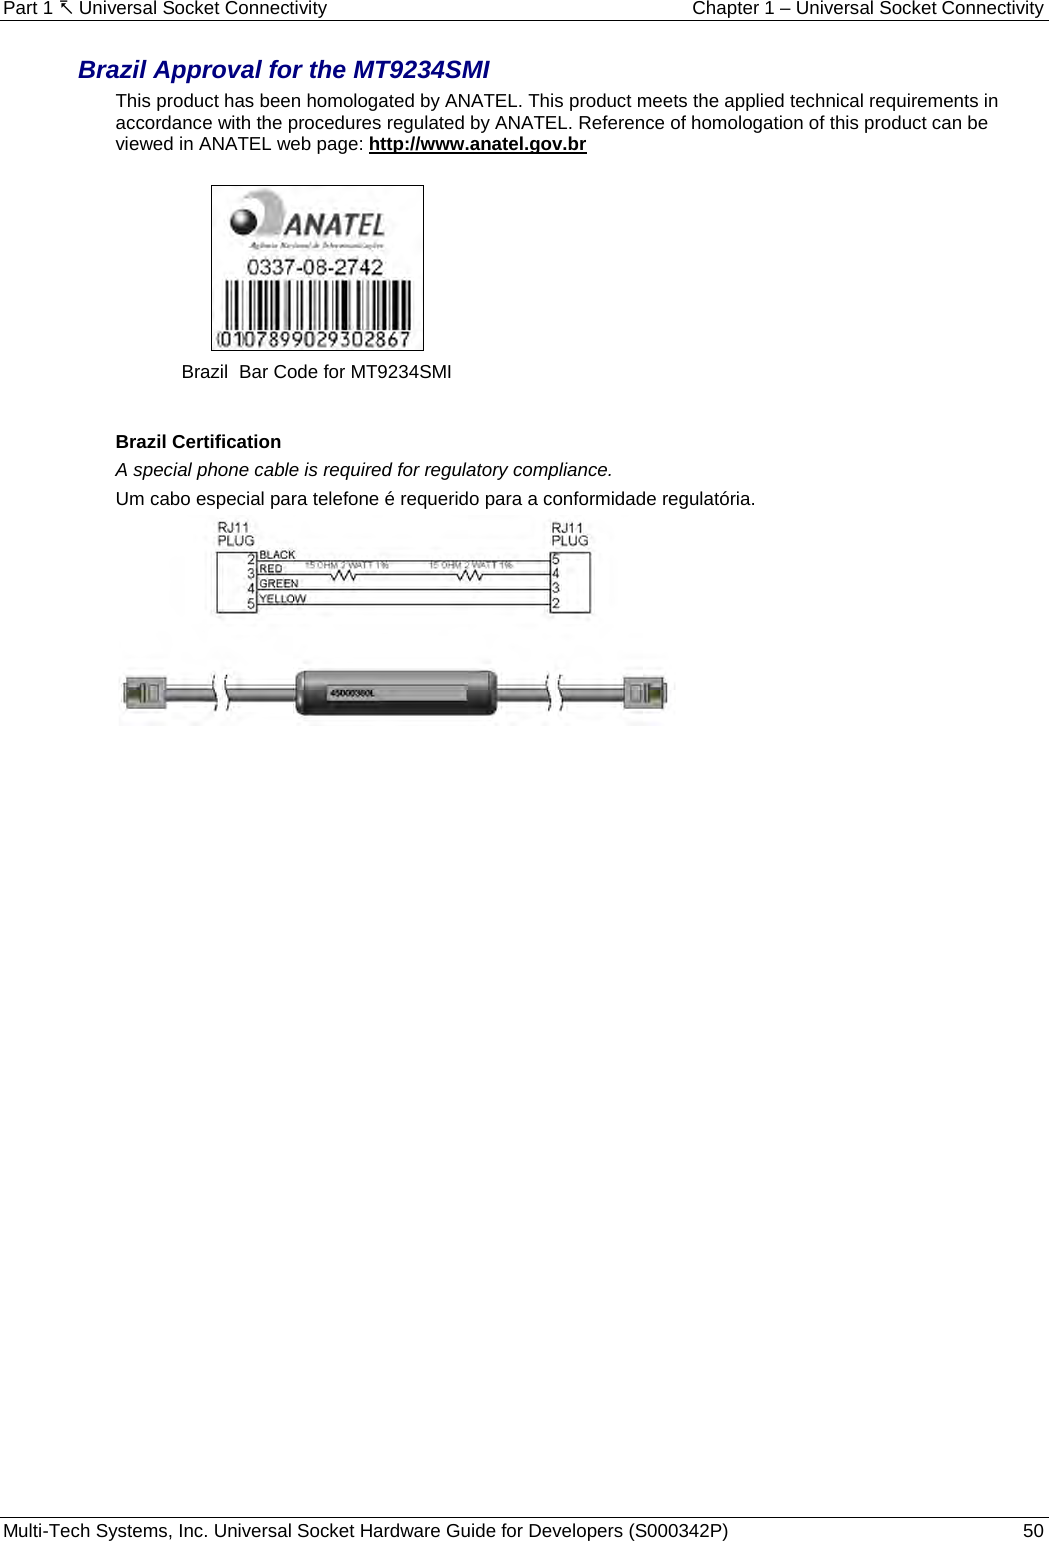 Part 1  Universal Socket Connectivity Chapter 1 – Universal Socket Connectivity Multi-Tech Systems, Inc. Universal Socket Hardware Guide for Developers (S000342P)  50  Brazil Approval for the MT9234SMI  This product has been homologated by ANATEL. This product meets the applied technical requirements in accordance with the procedures regulated by ANATEL. Reference of homologation of this product can be viewed in ANATEL web page: http://www.anatel.gov.br    Brazil  Bar Code for MT9234SMI   Brazil Certification  A special phone cable is required for regulatory compliance. Um cabo especial para telefone é requerido para a conformidade regulatória.       